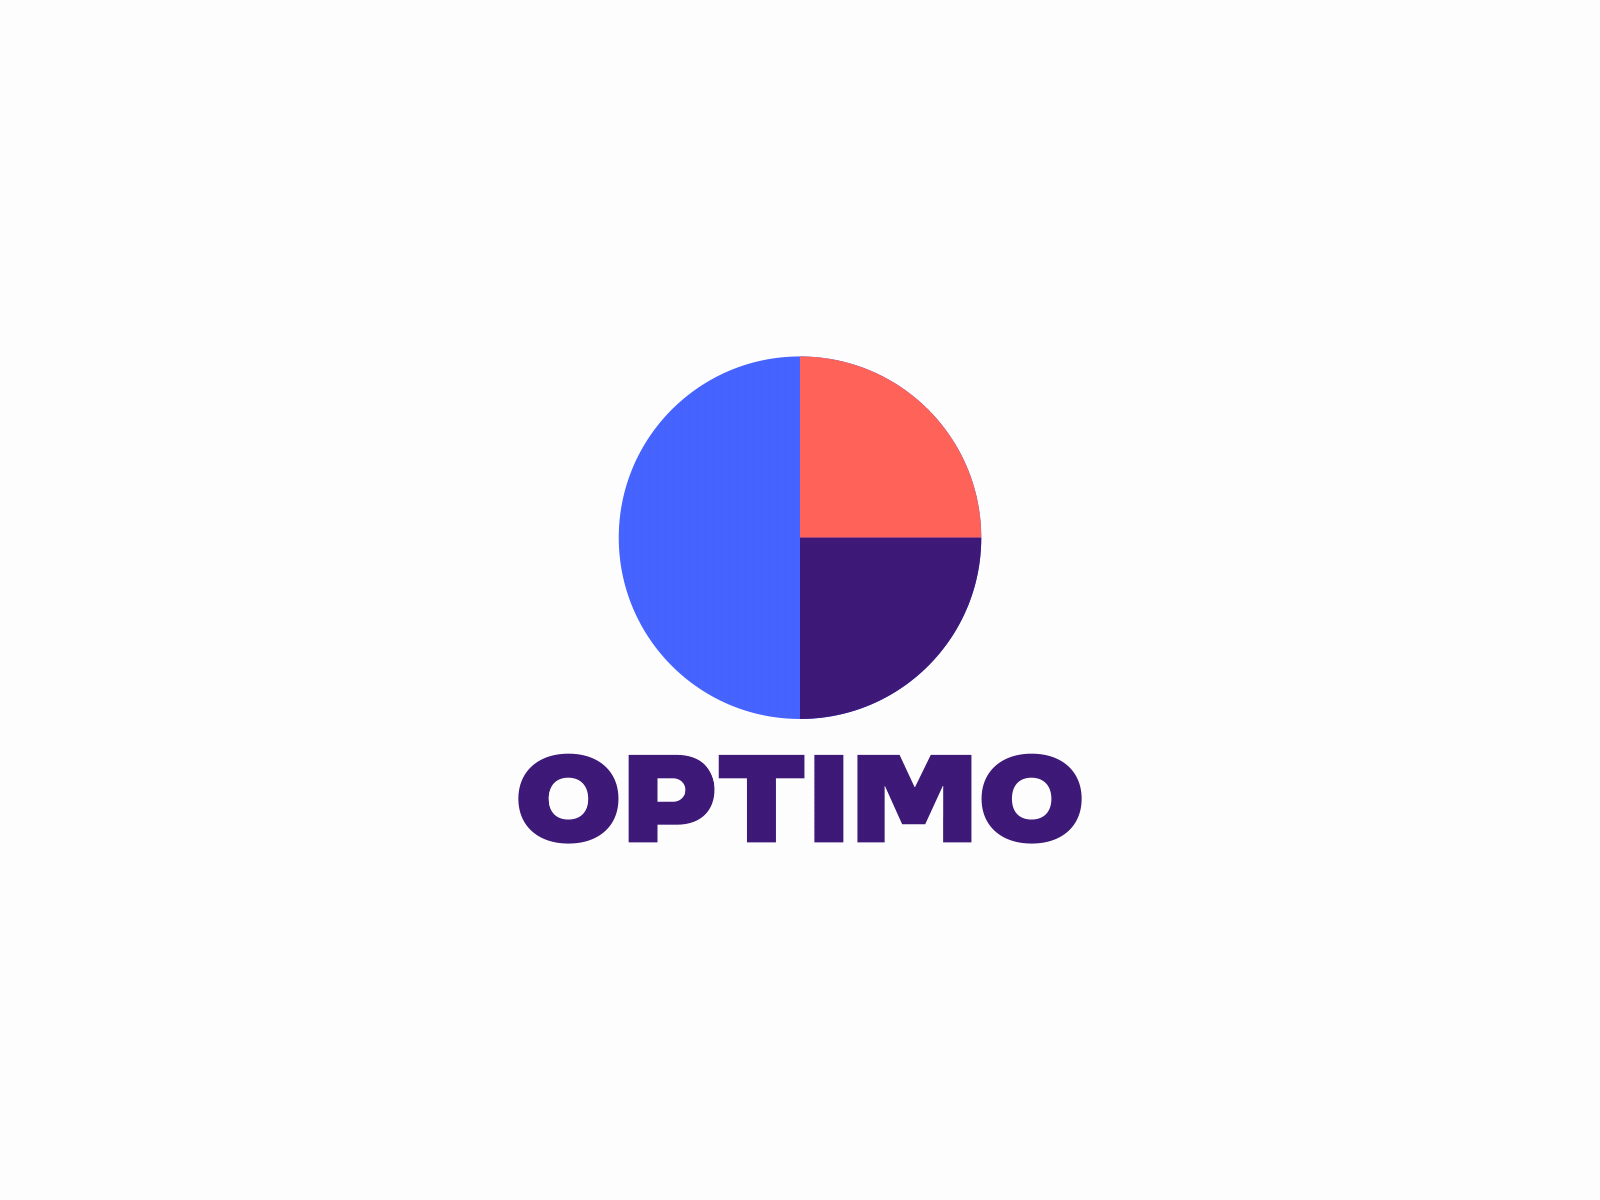 OPTIMO 2d animation clean graphics intro logo logo animation logo reveal motion optimo simple